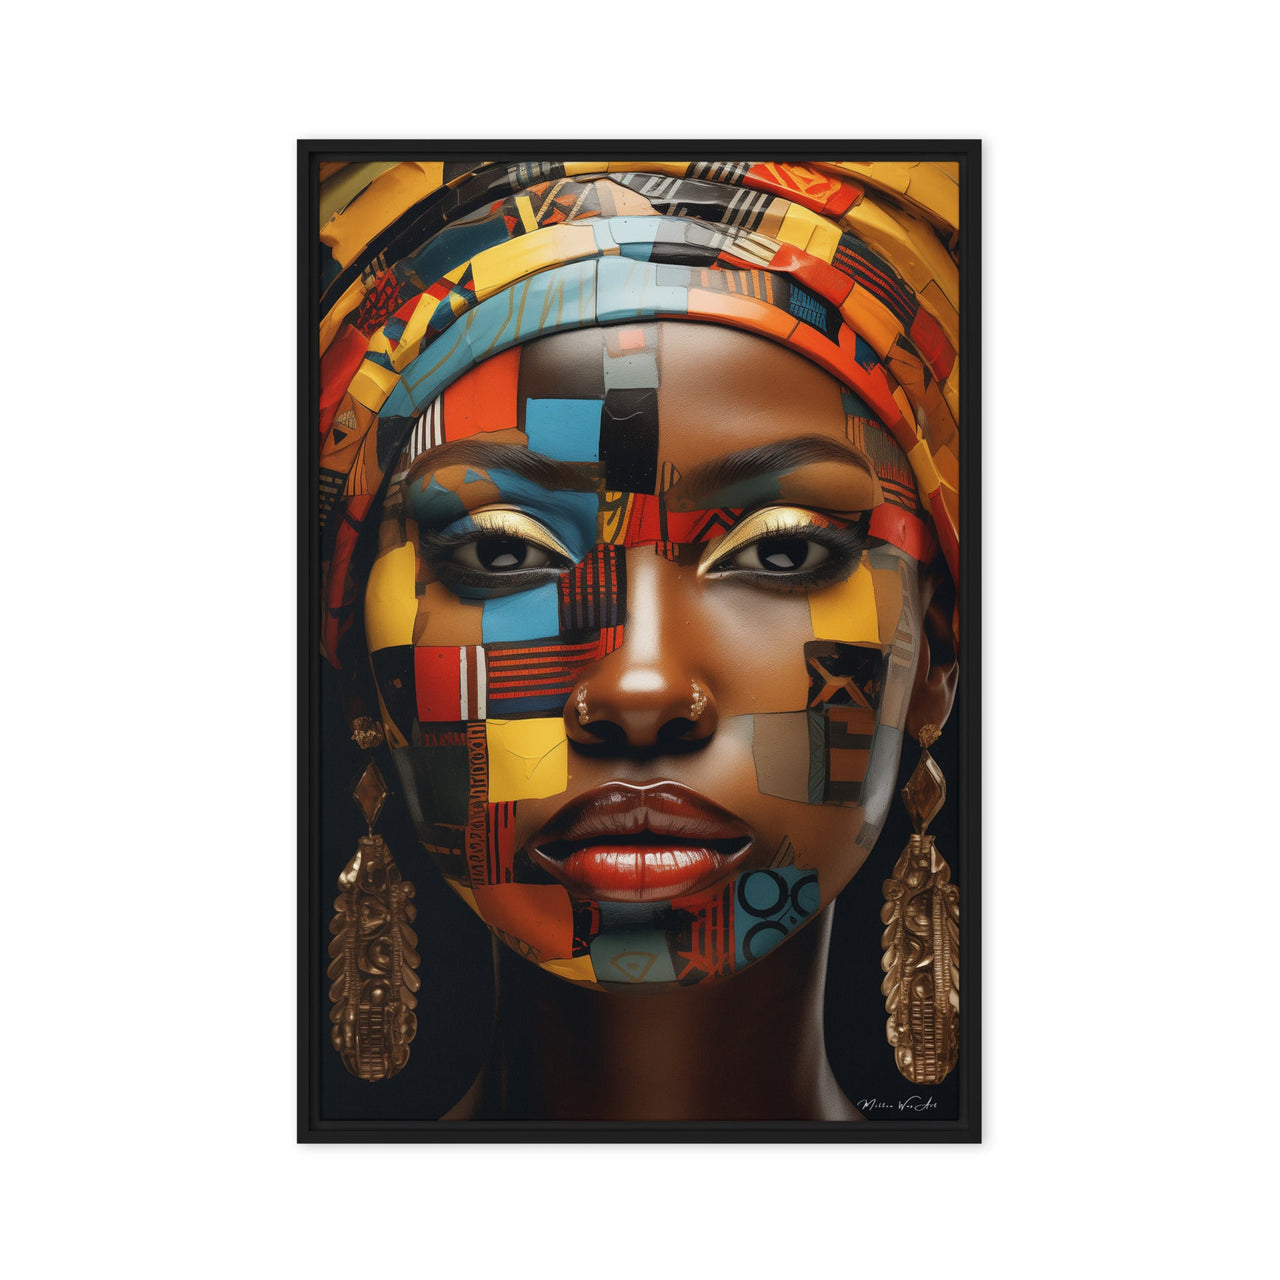 Captivating artwork from Milton Wes Art, showcasing a woman with intricate face paint in a tapestry of rich colors, hung on a charcoal wall in a modernly styled room with a glass-fronted wardrobe and circular leather ottoman.